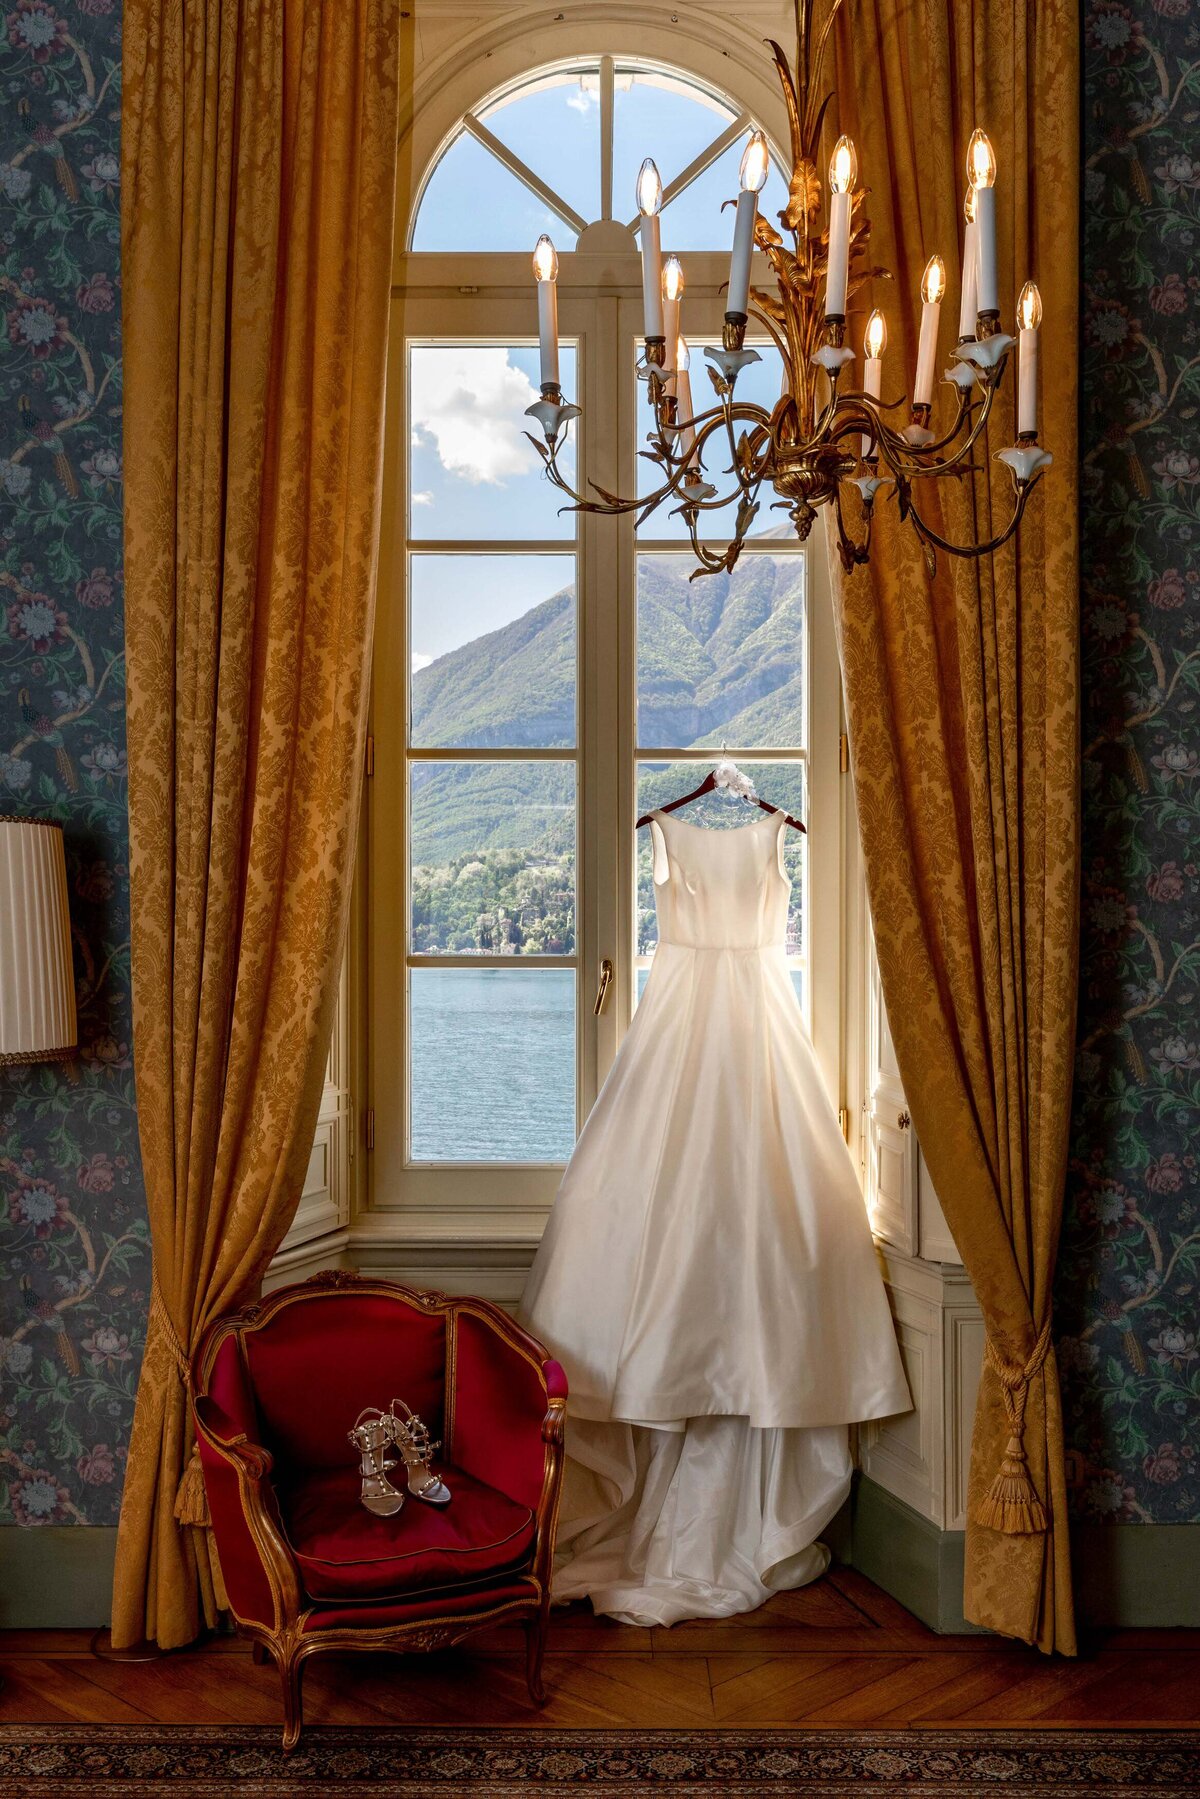 A wedding dress hanging up in a window with shoes on the chair next to it.